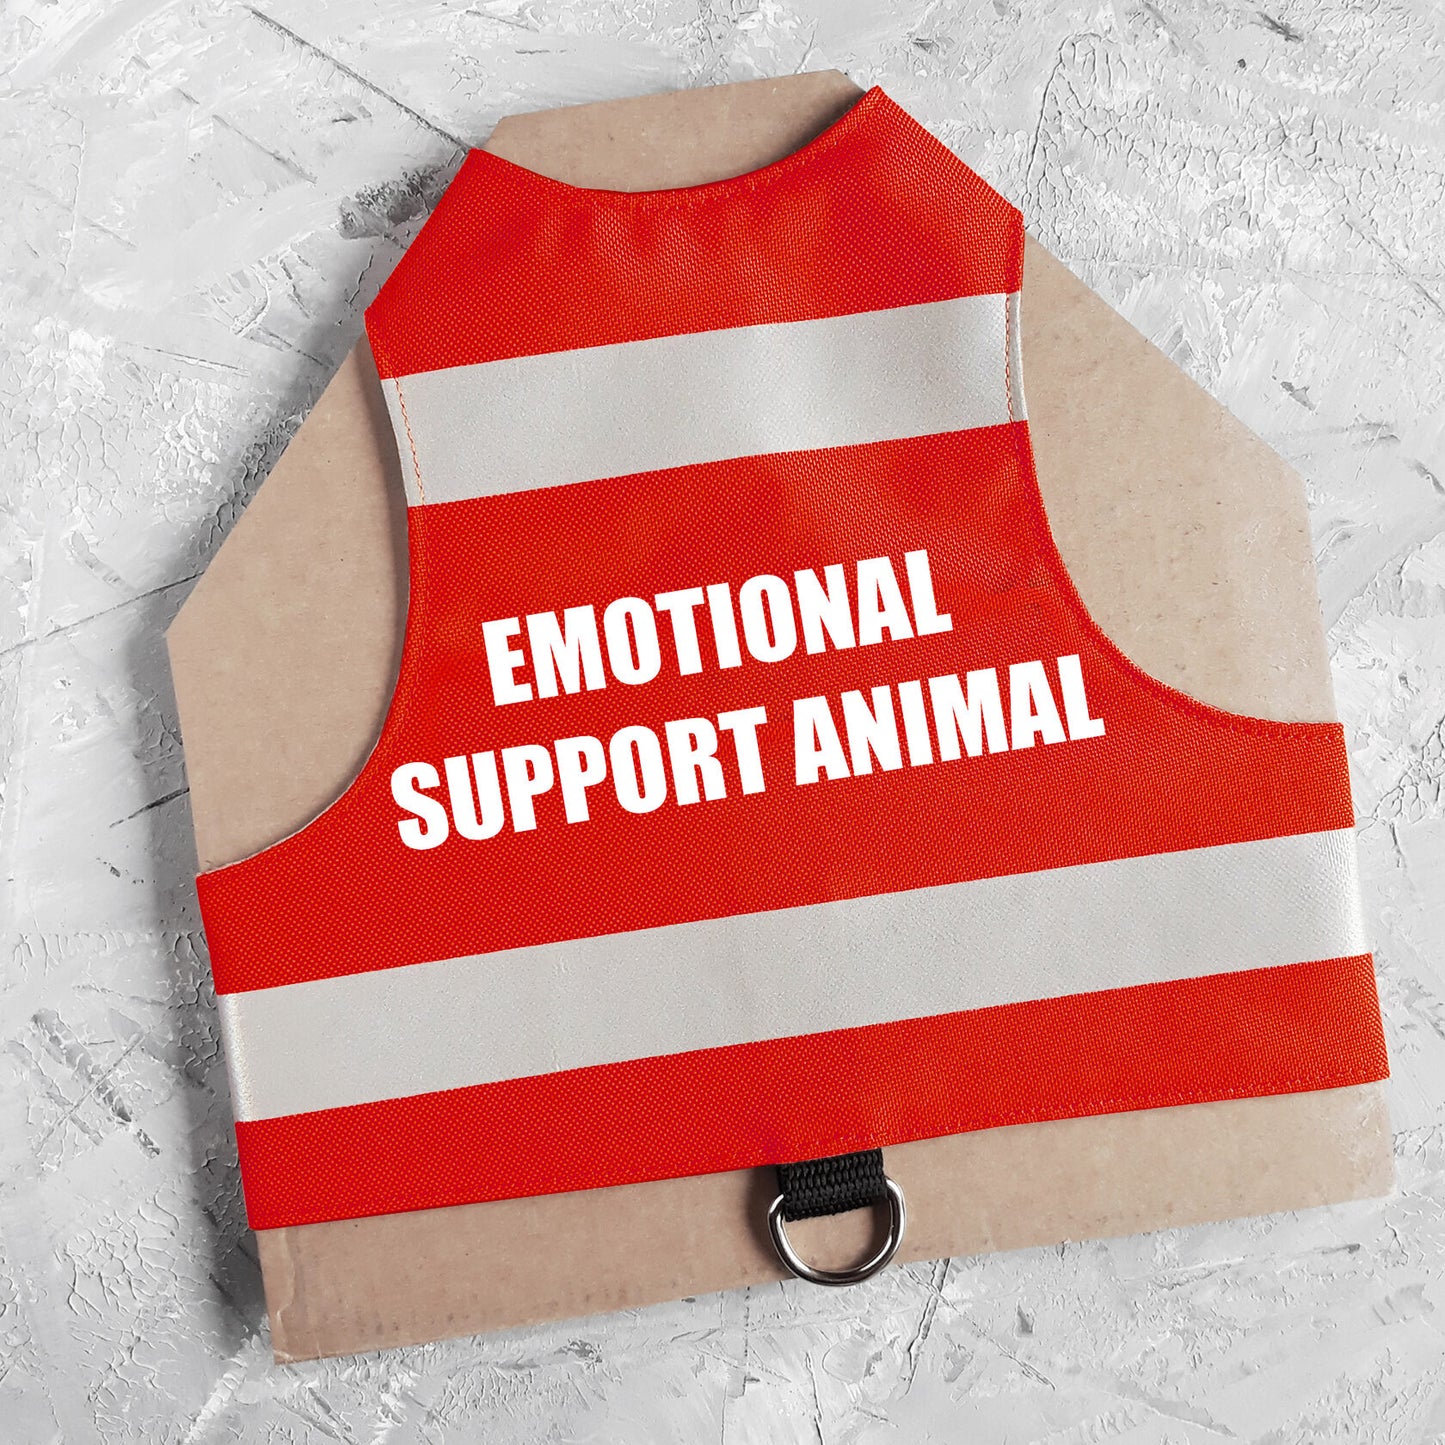 EMOTIONAL SUPPORT ANIMAL. Water-repellent Safety Cat Harness with reflective stripes